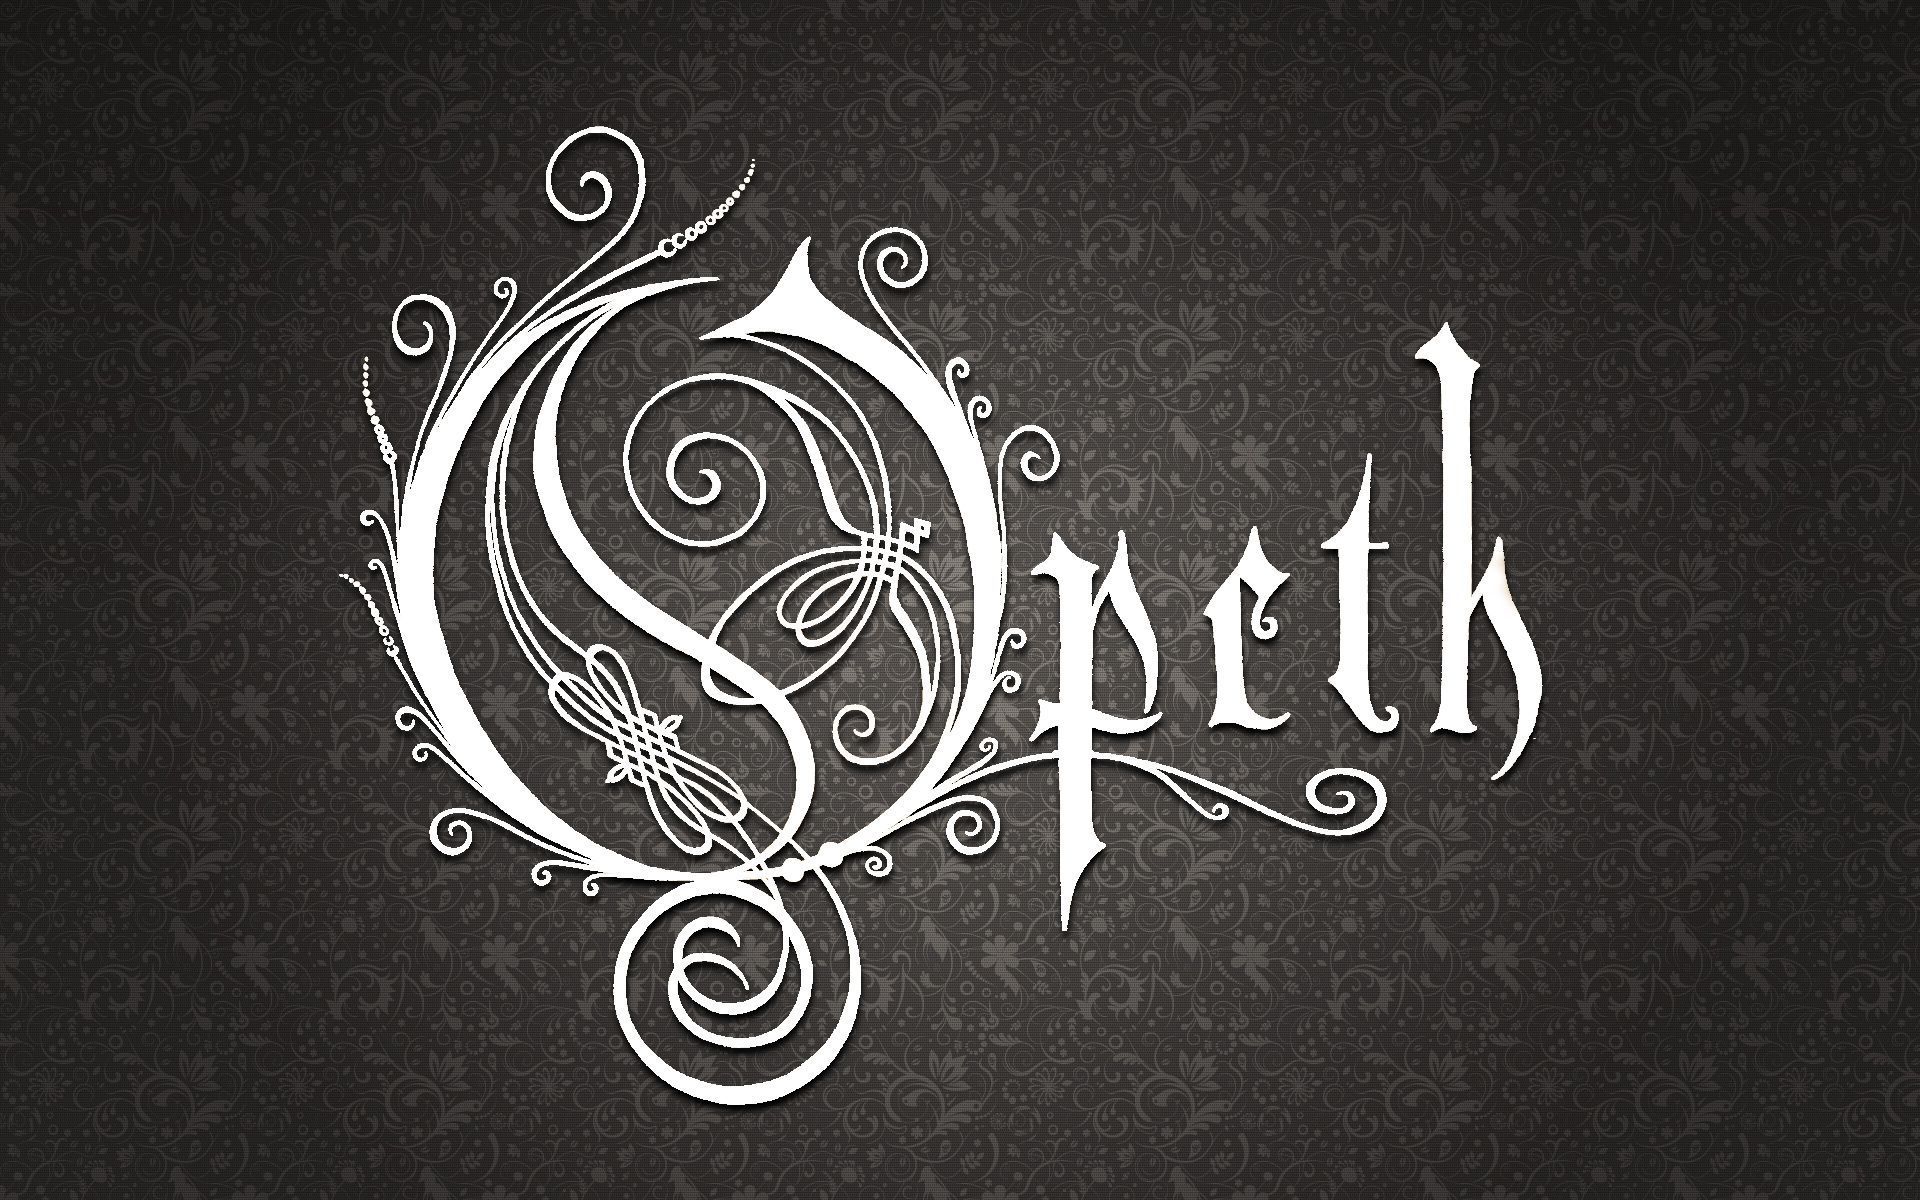 Opeth wallpaper - - High Quality and Resolution